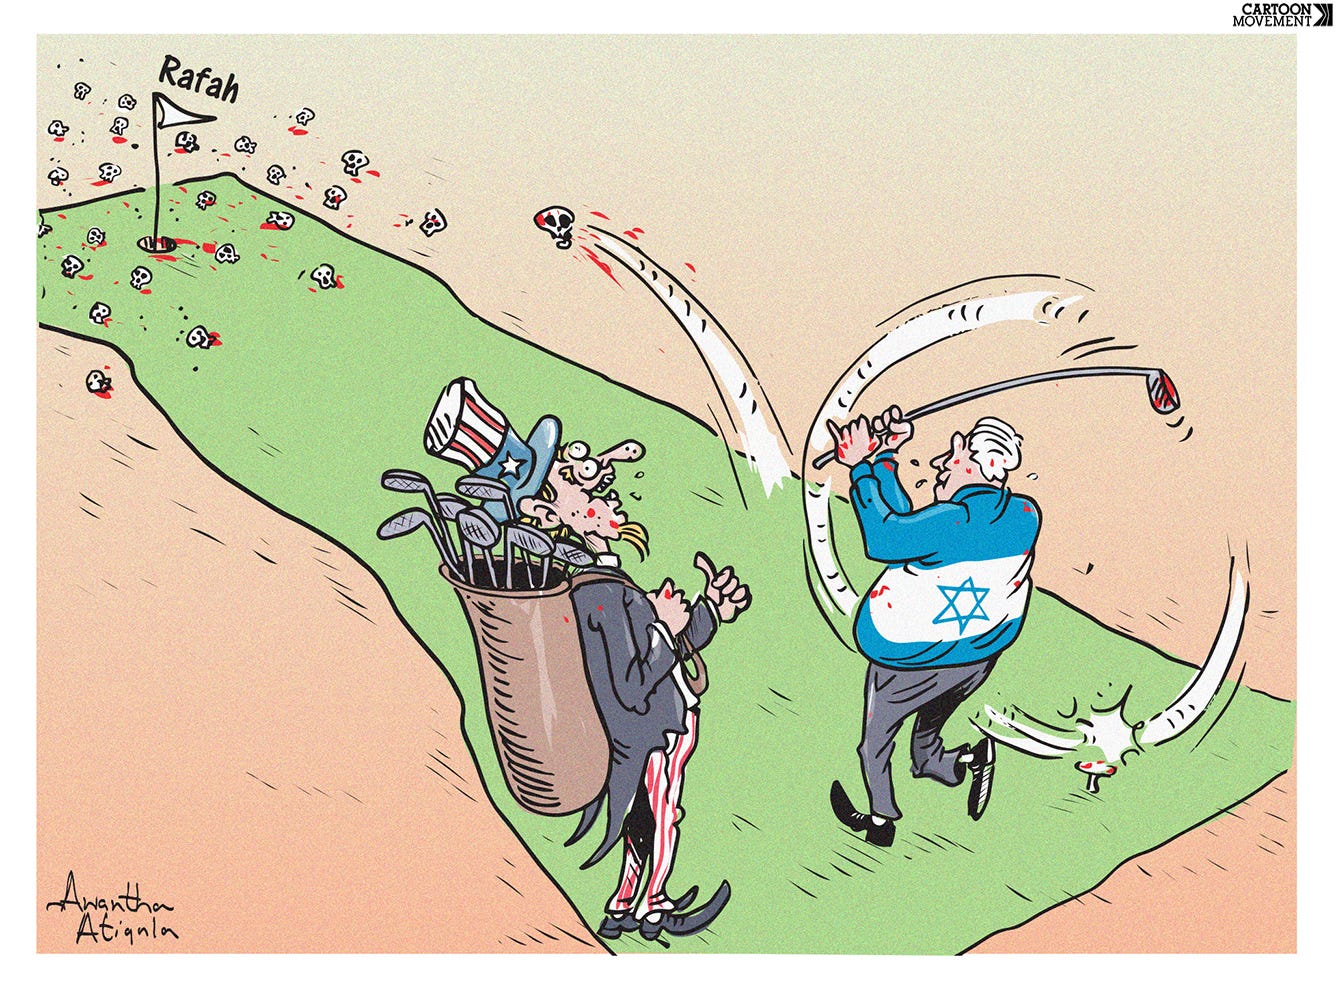 Cartoon showing Netanyahu playing golf in Gaza, hitting skulls with his golf club towards Rafah in the south, while Uncle Sam is standing by as a caddie, carrying the bag of golf clubs, and with a thumb up in approval of Netanyahu's game.